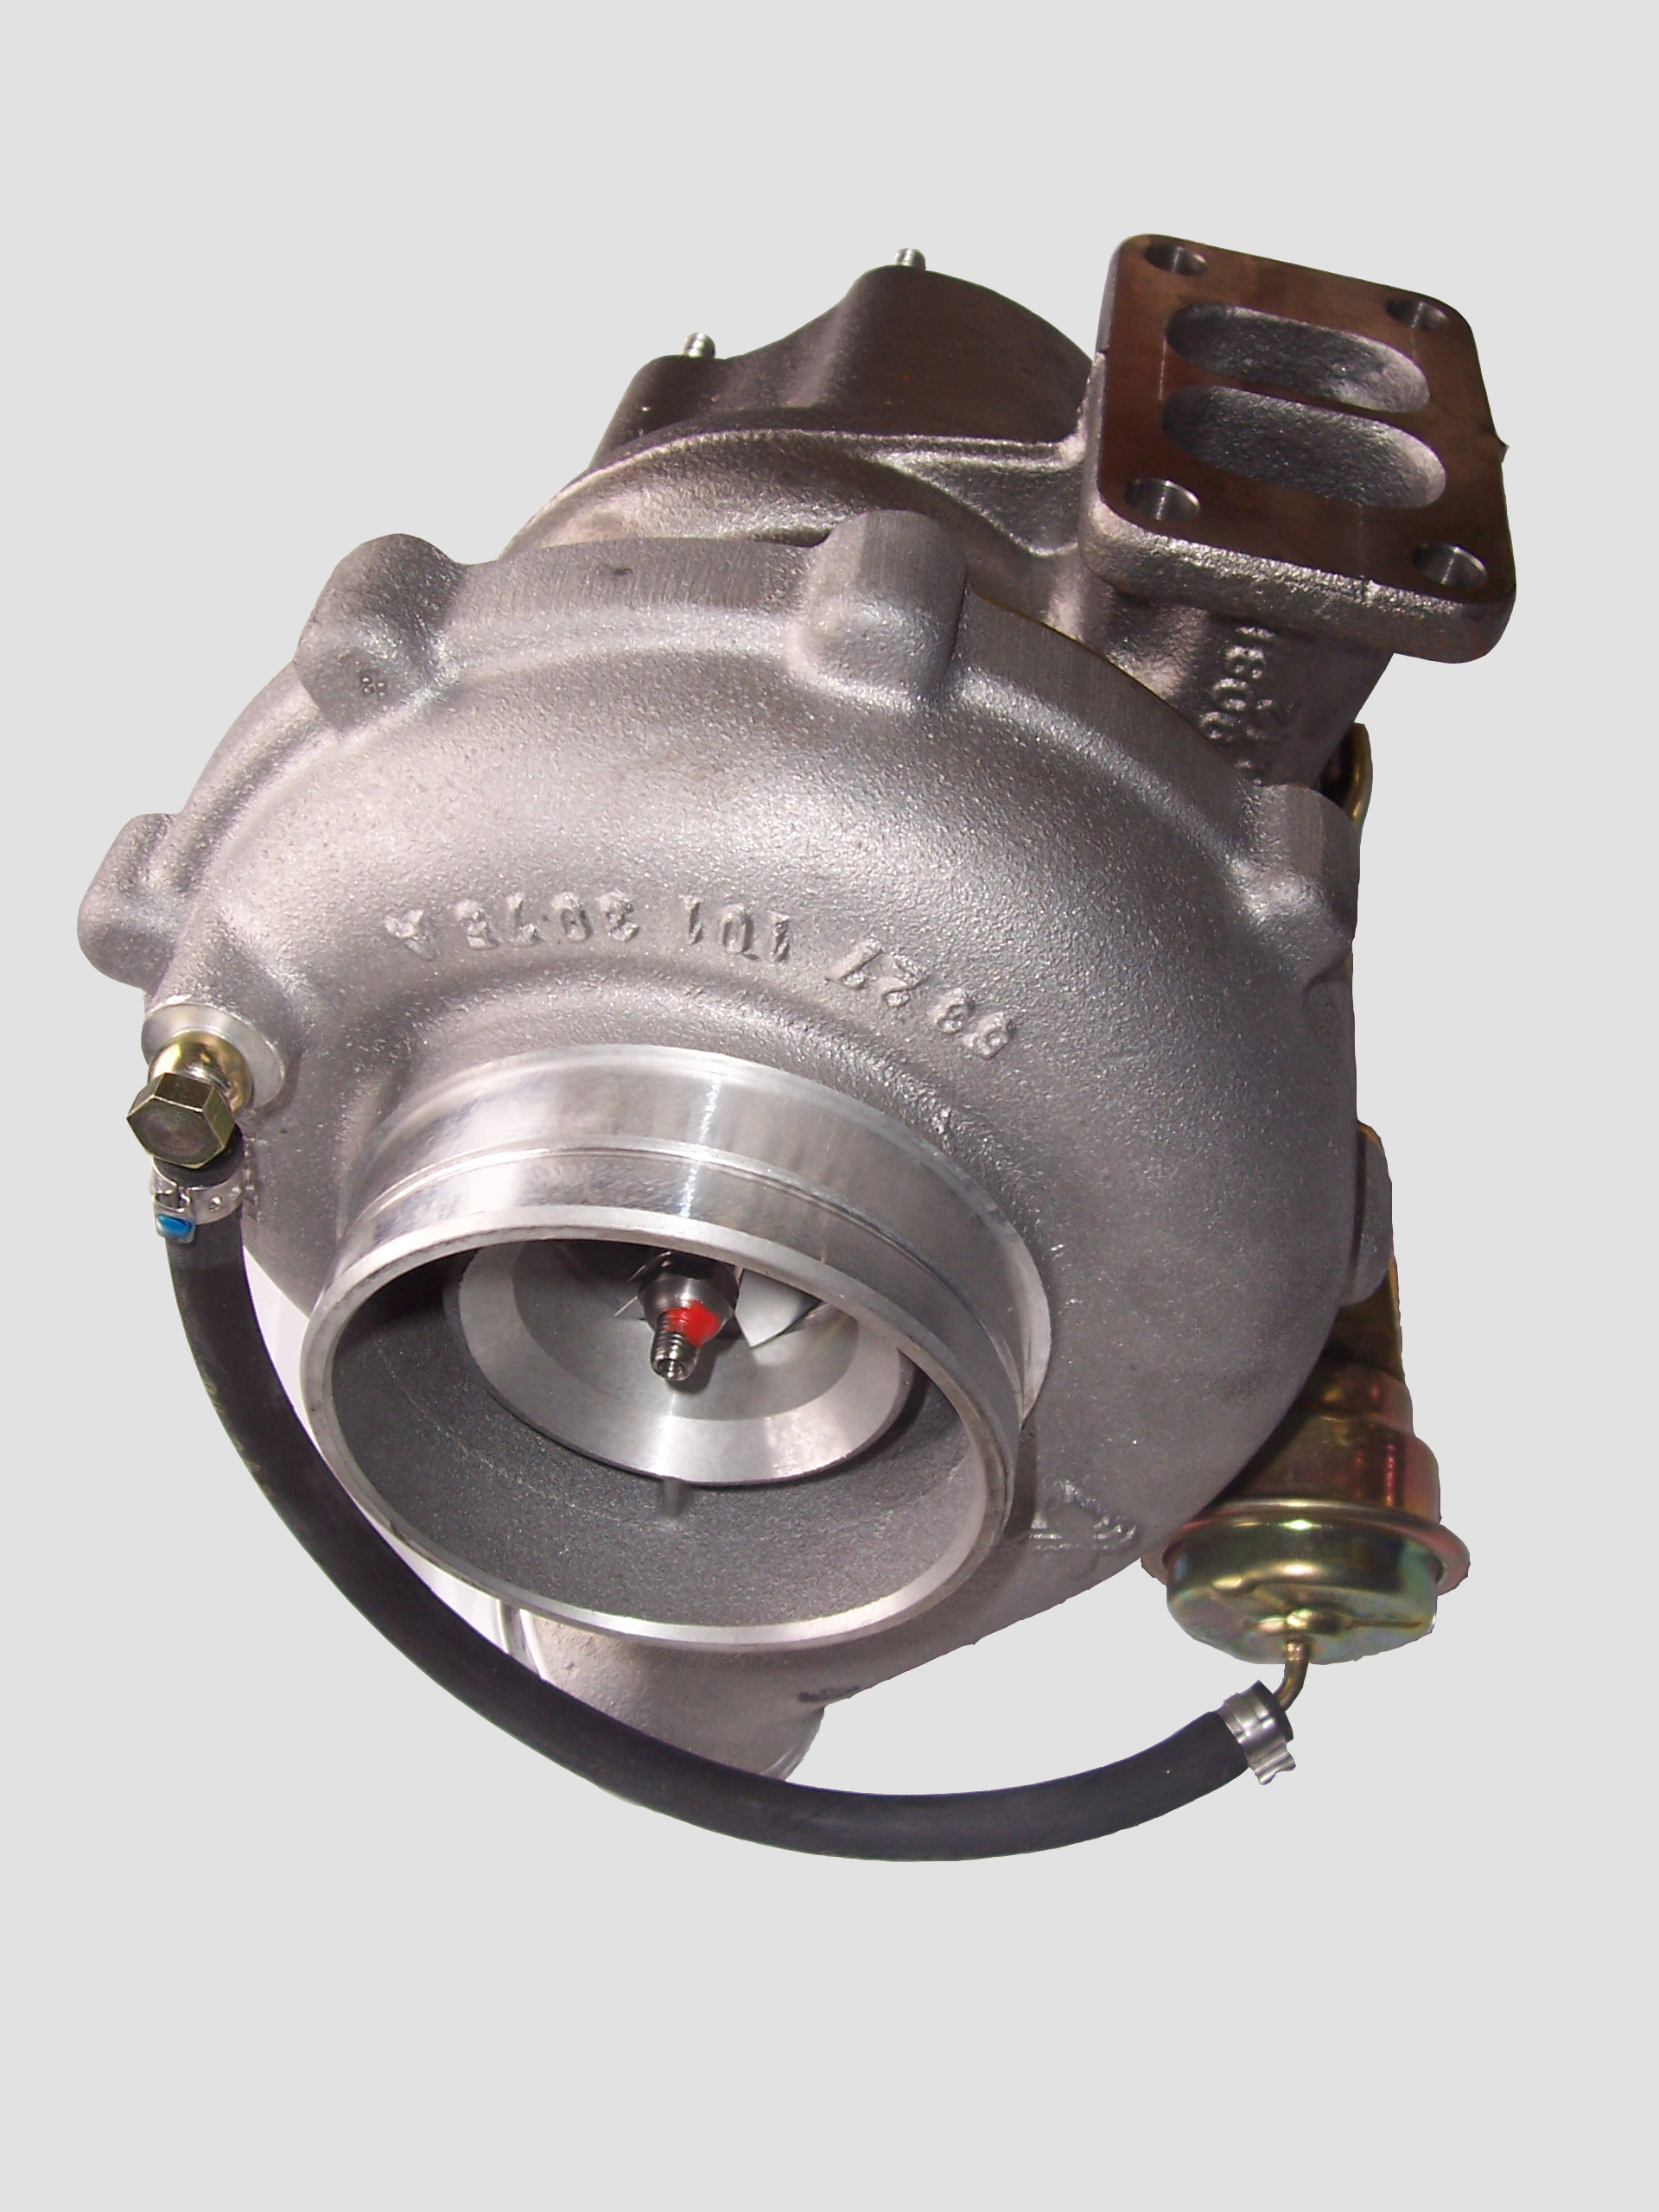 Turbo charger with wastegate